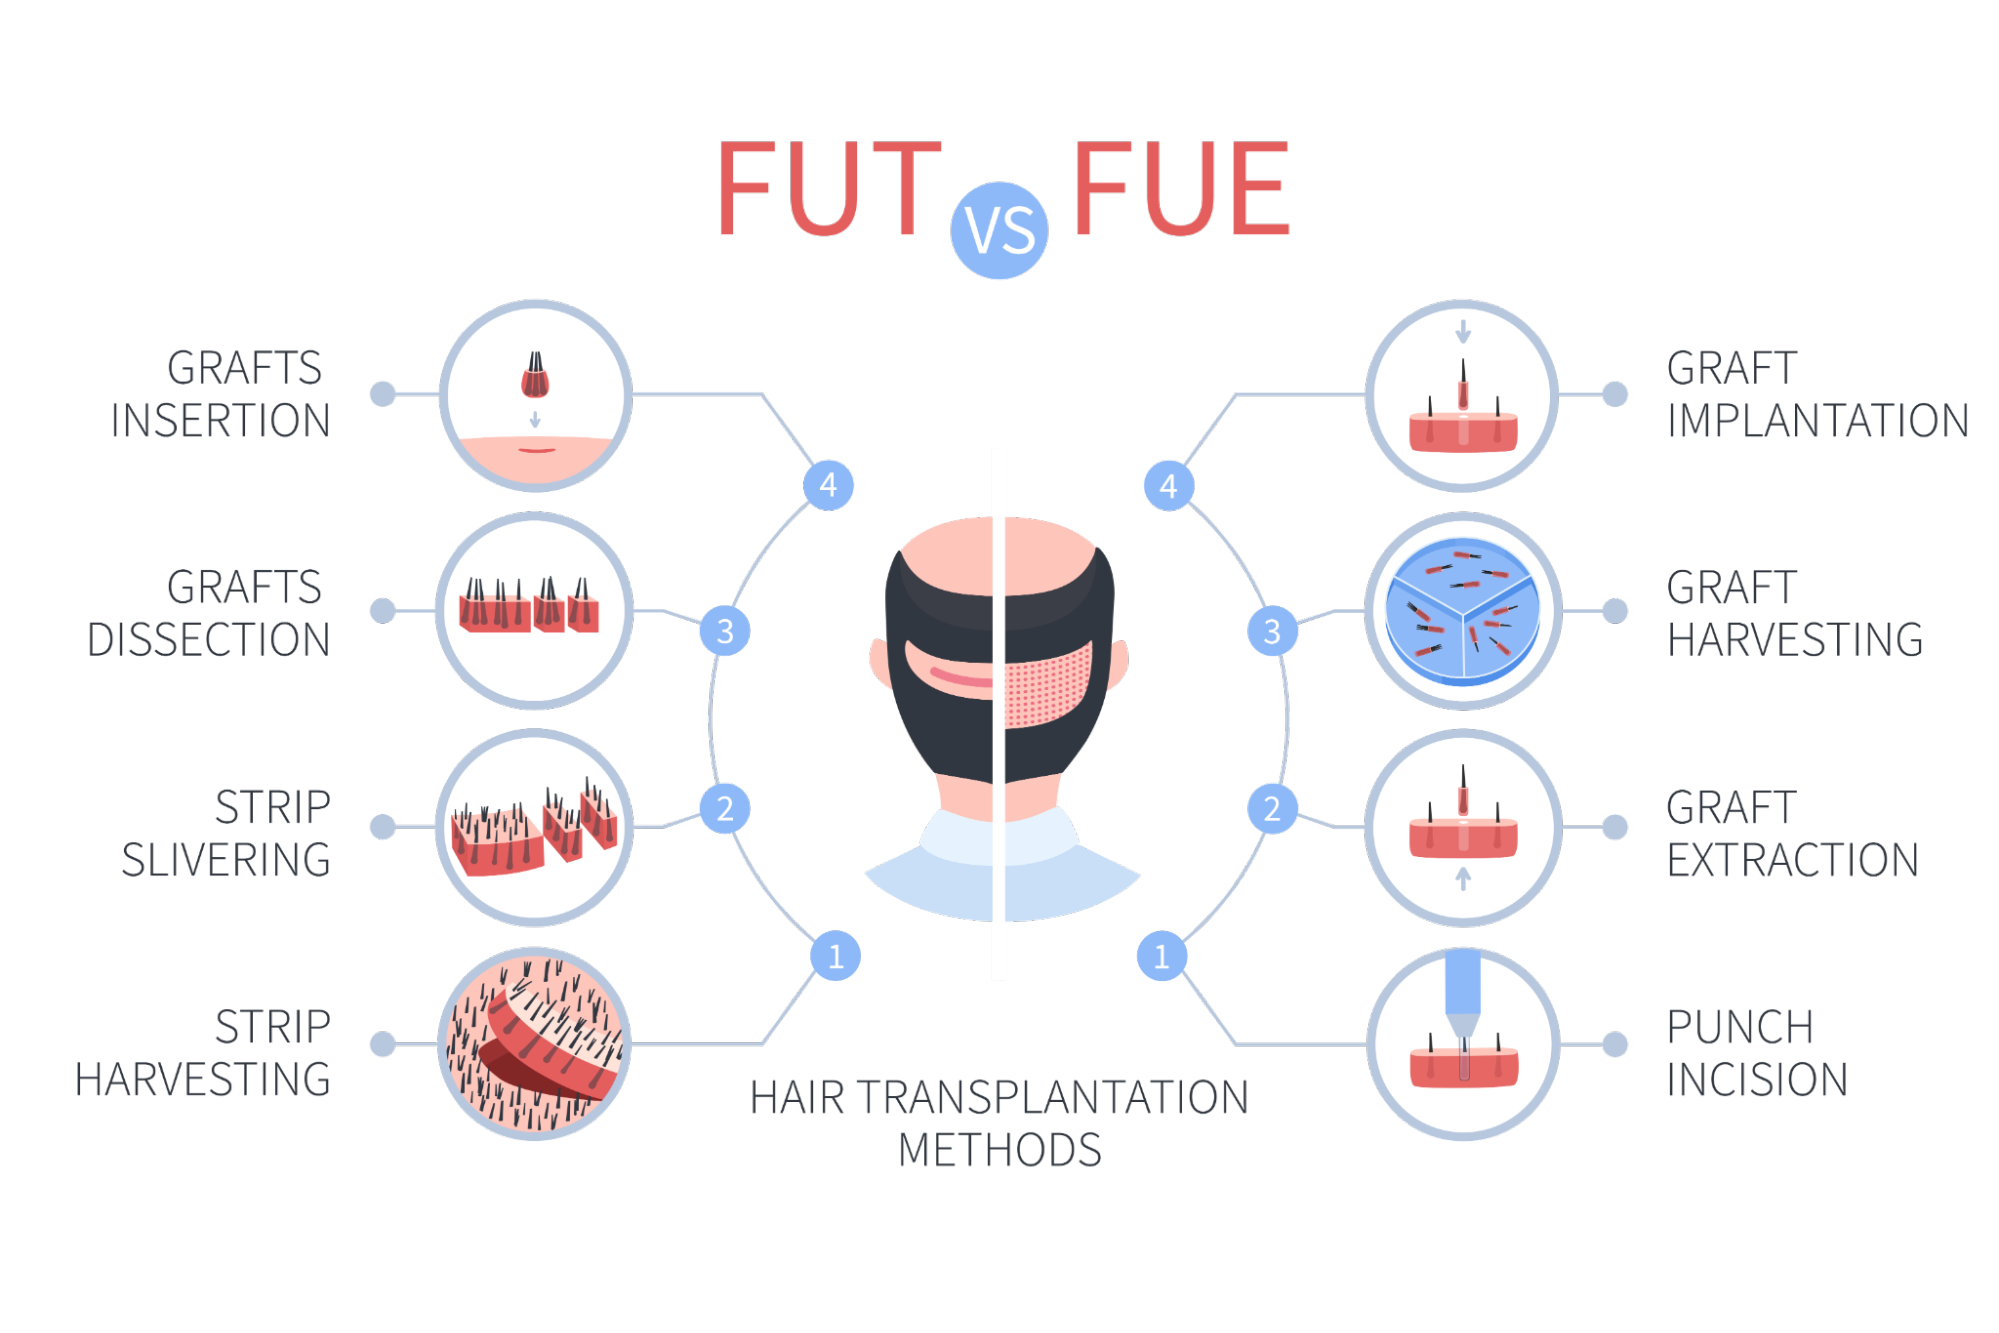 The difference between FUE vs FUT hair transplants informational graphic